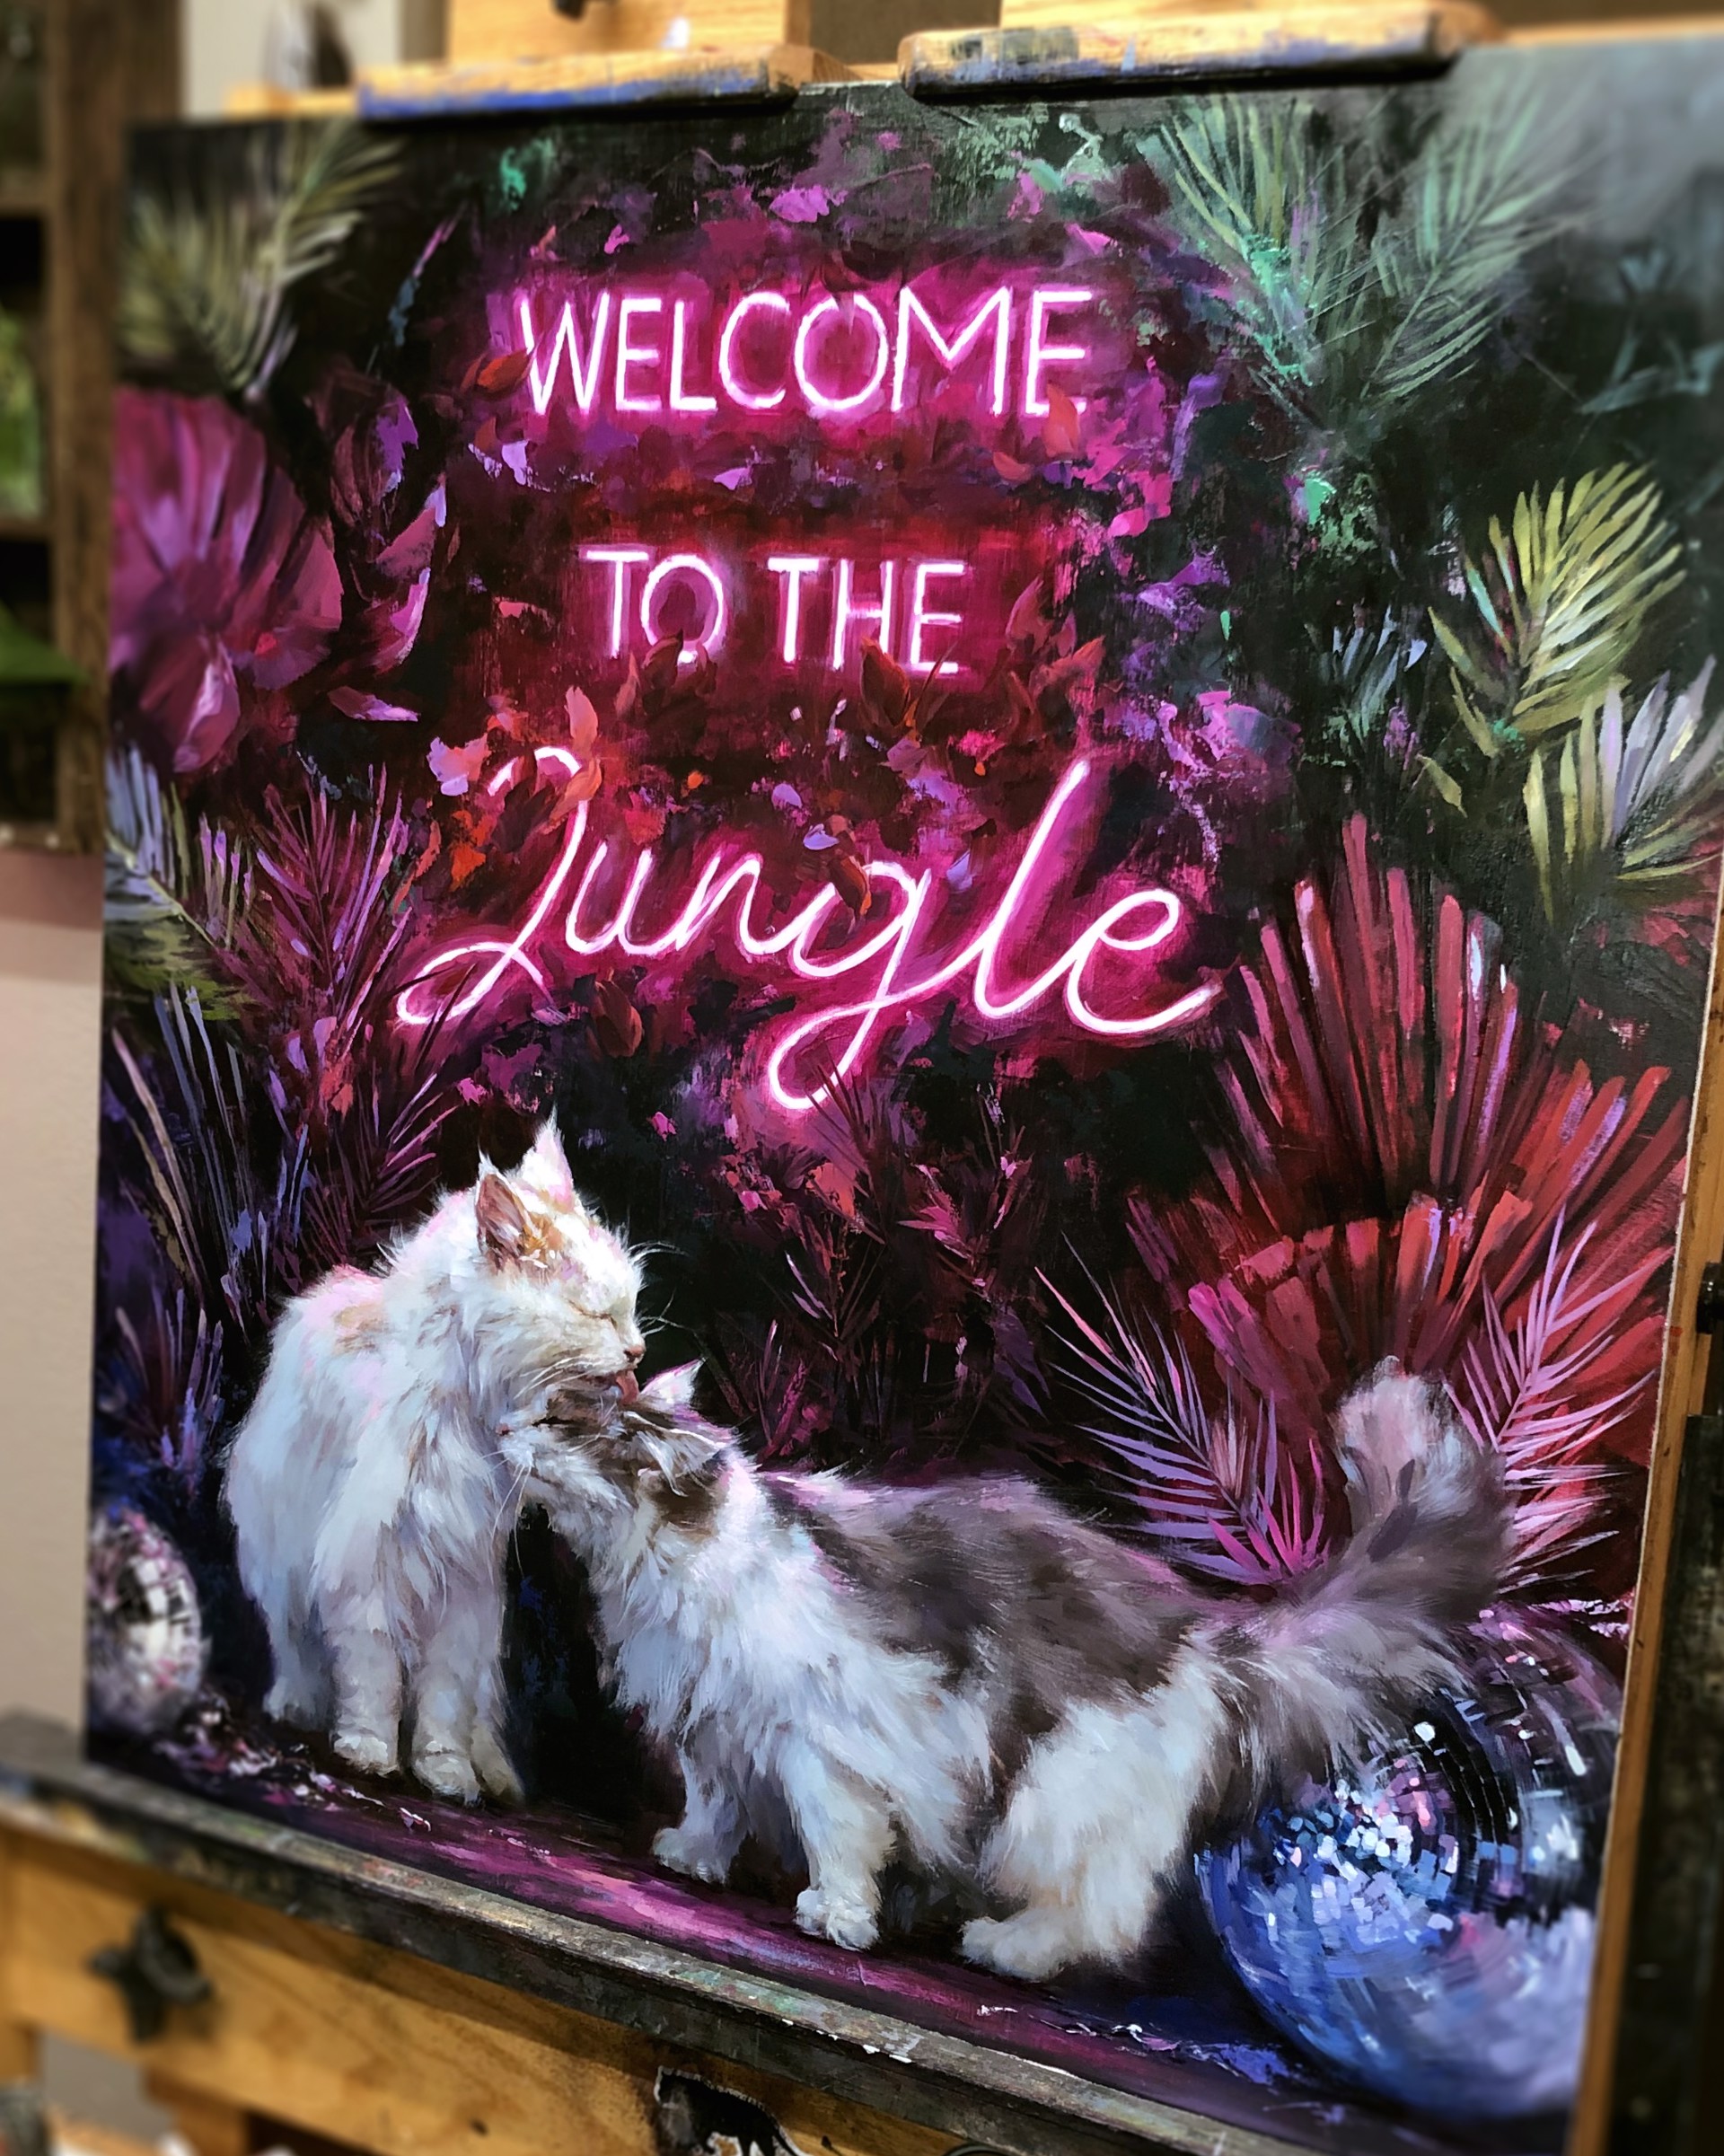 Welcome to the Jungle by Lindsey Kustusch